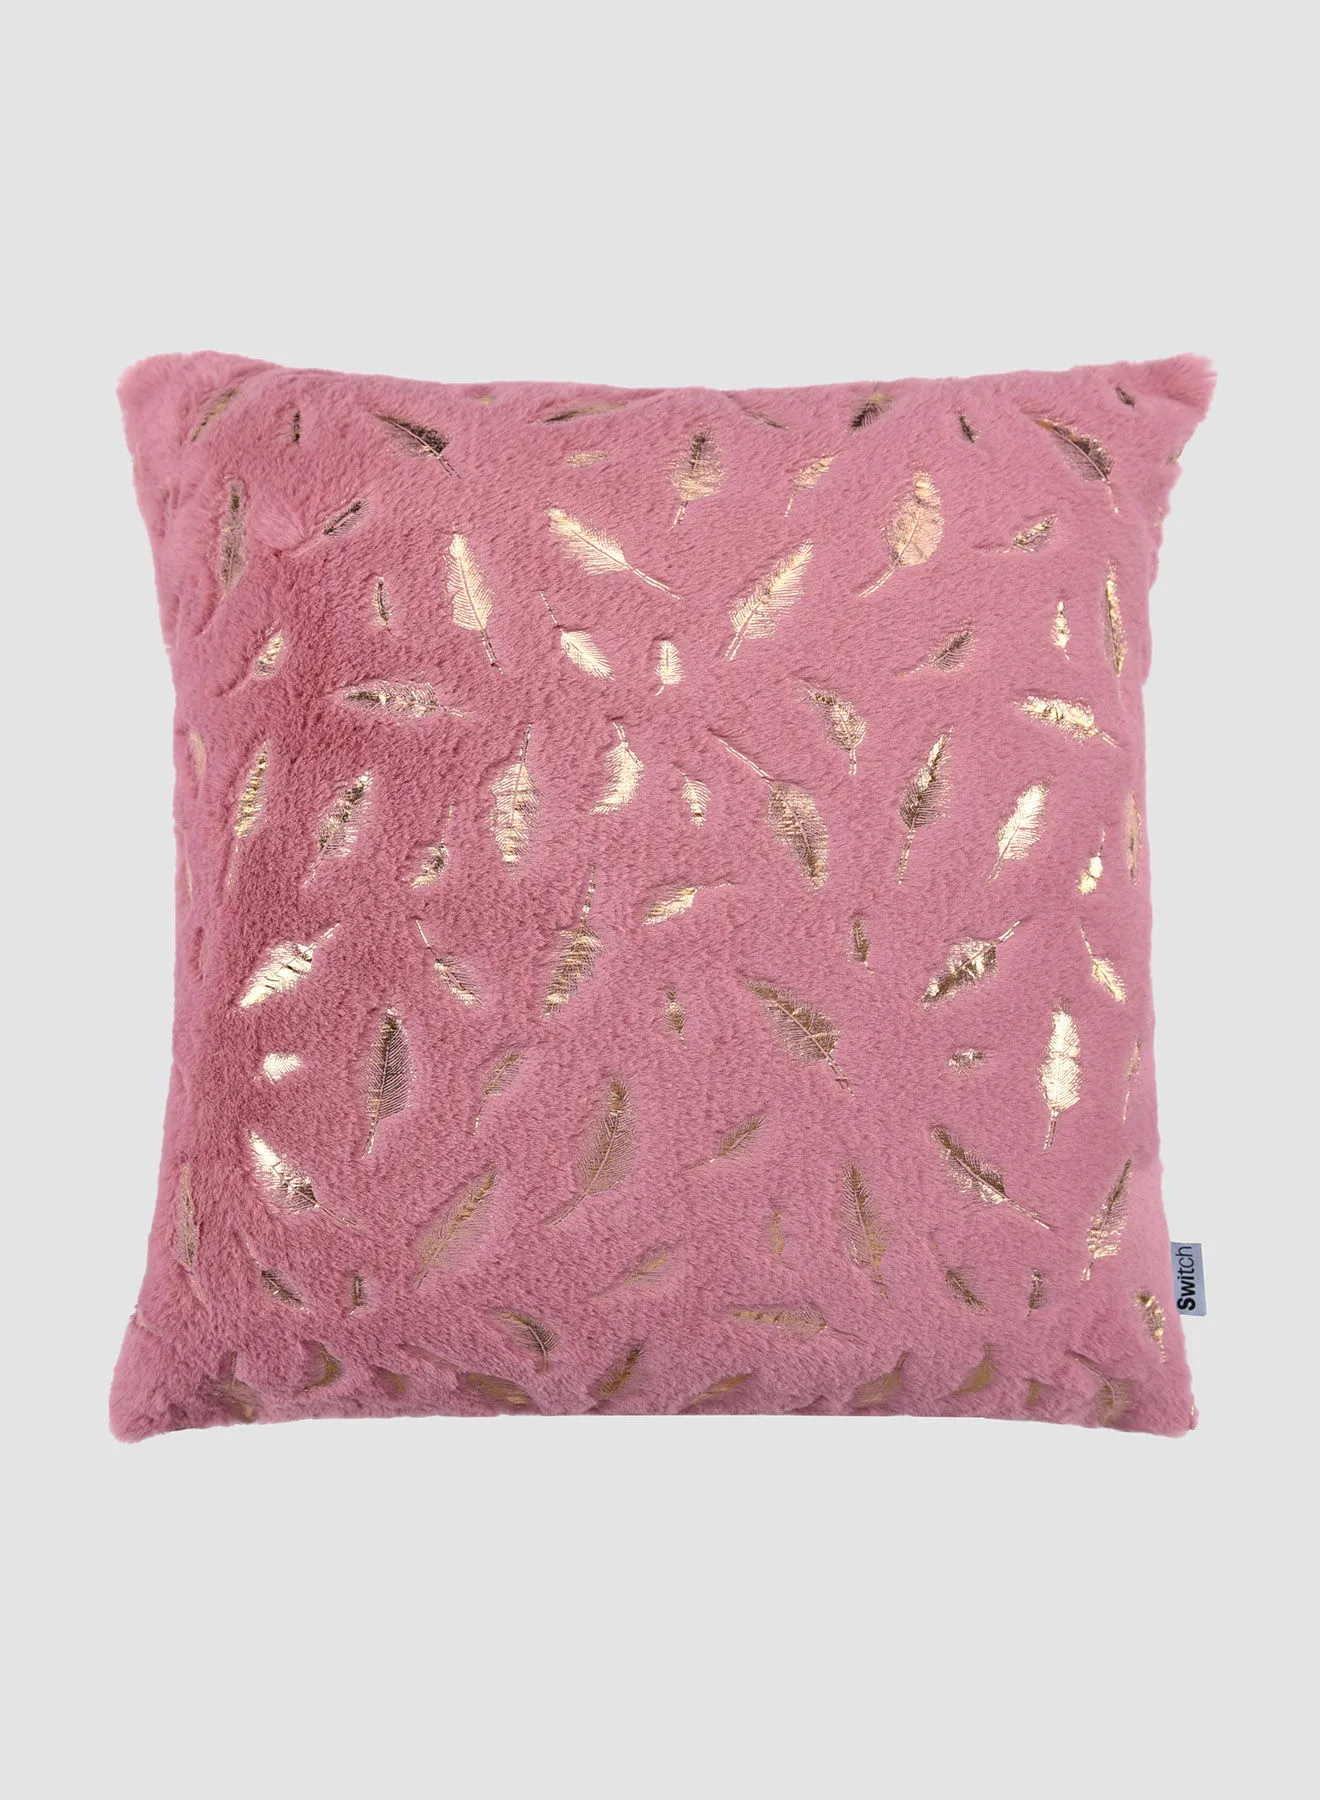 Switch Fur with Gold Feather Details, Unique Luxury Quality Decor Items for the Perfect Stylish Home Pink CUS232 45 x 45cm